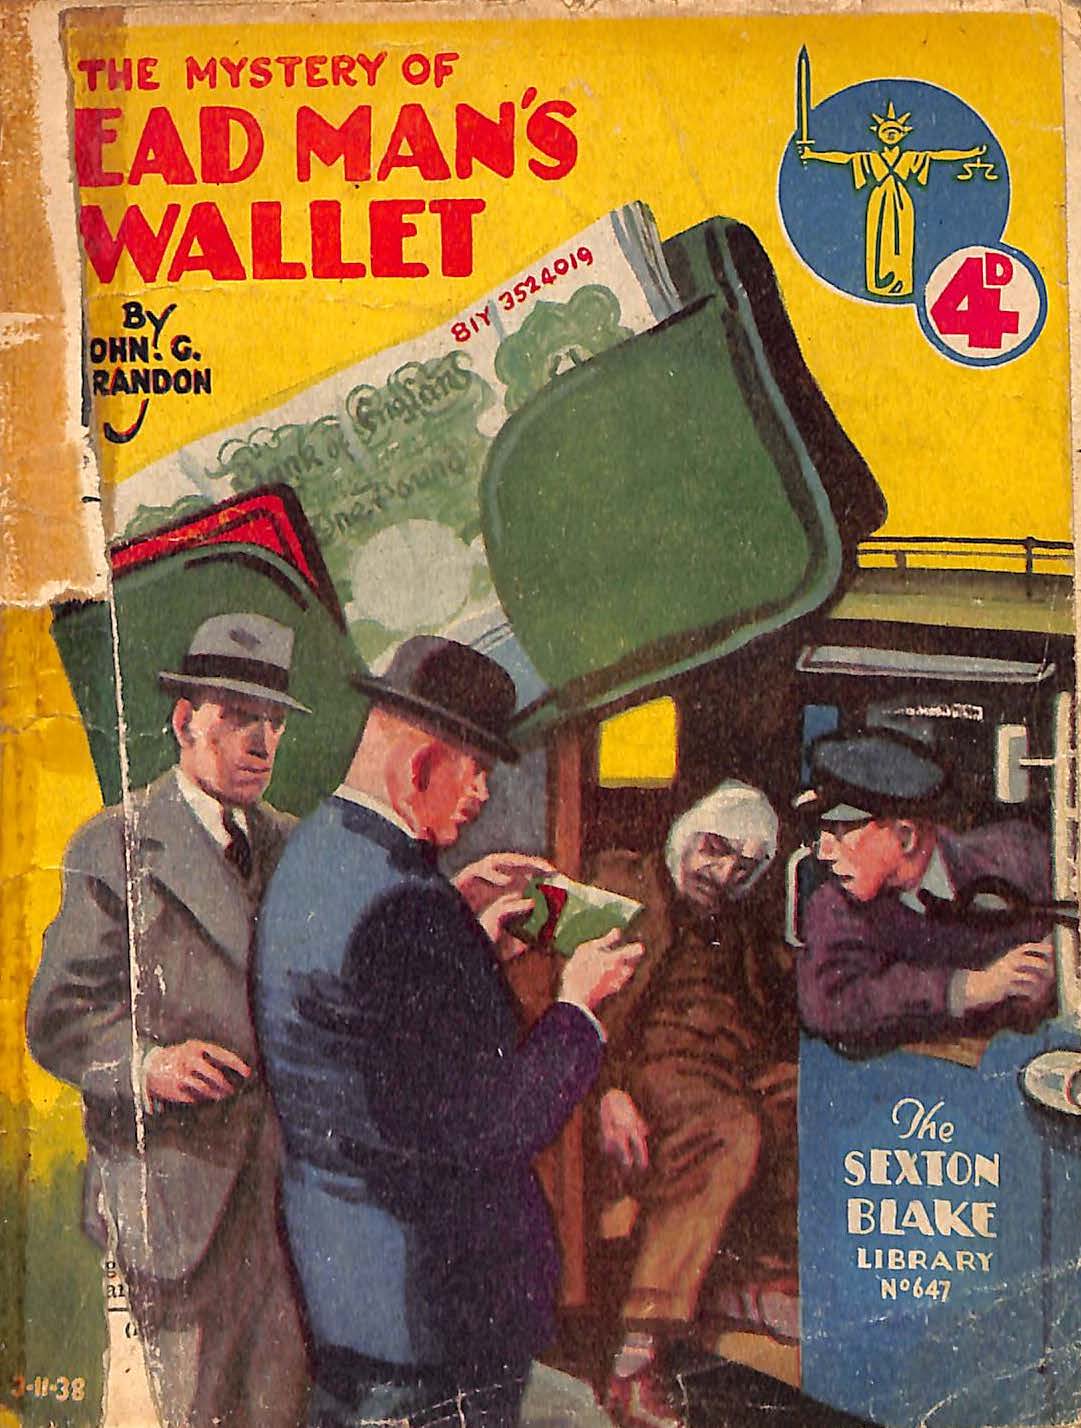 Book Cover For Sexton Blake Library S2 647 - The Mystery of the Dead Man's Wallet